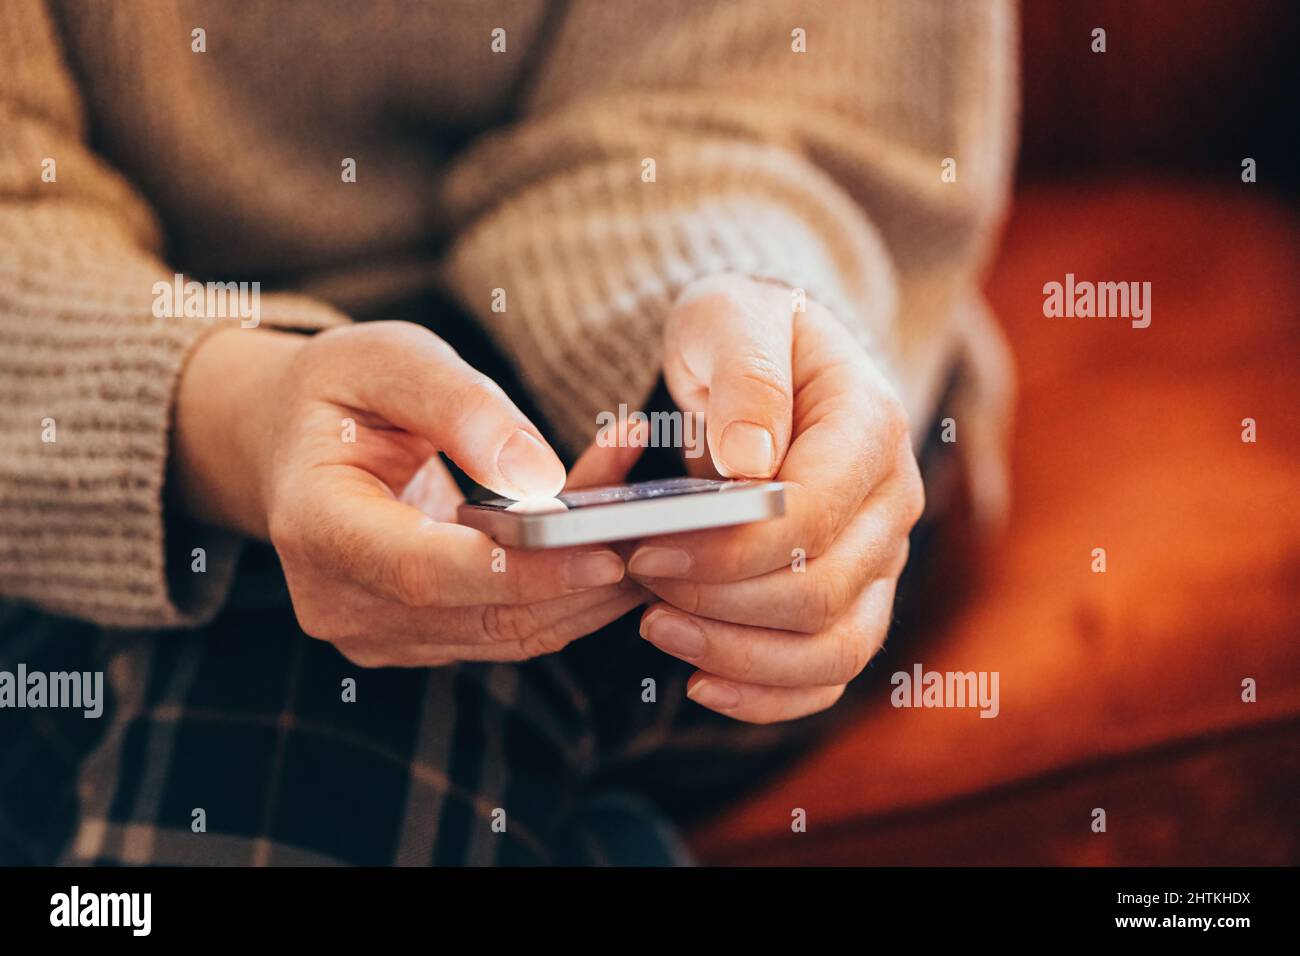 Fomo, fear of missing out on information, events or experiences makes people use their smartphones more than usual, selective focus Stock Photo